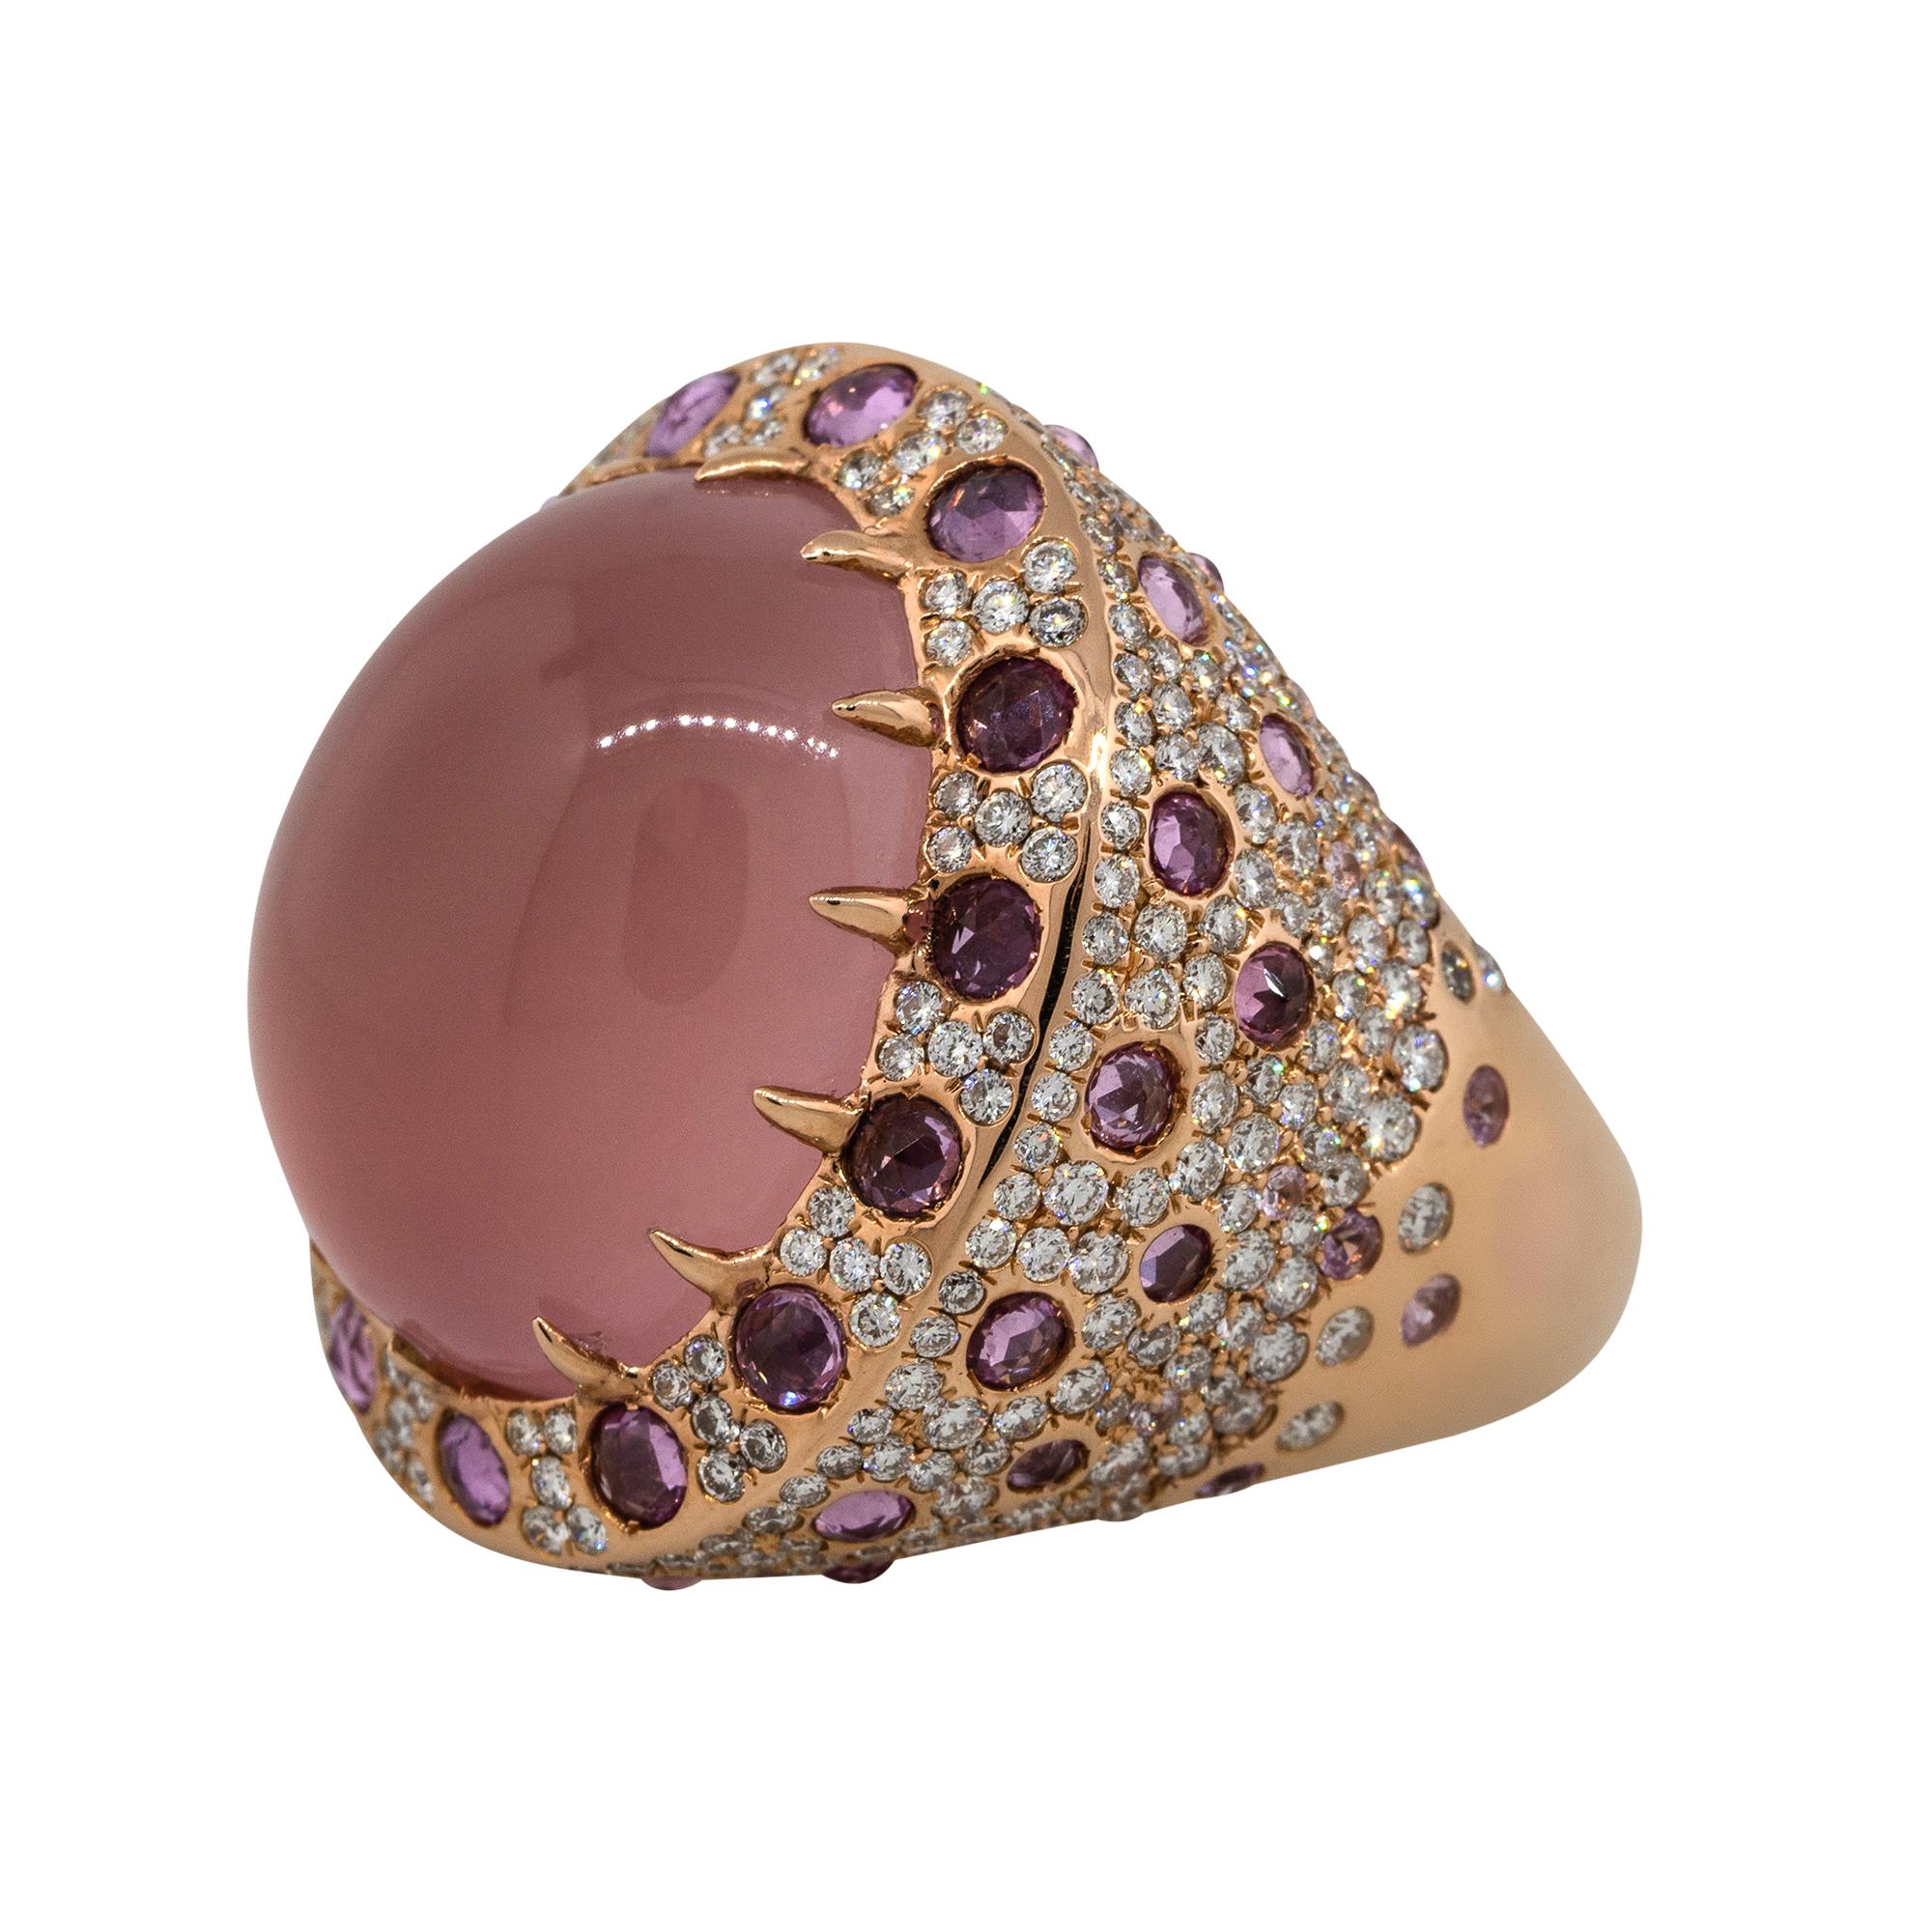 Material: 18k Rose Gold
Gemstone Details: Approx. 39.80ctw rose Quartz gemstone.
                               Approx. 3.69ctw of round cut pink Sapphire gemstones.
Diamond Details: Approx. 4.37ctw of round cut Diamonds. Diamonds are G/H in color